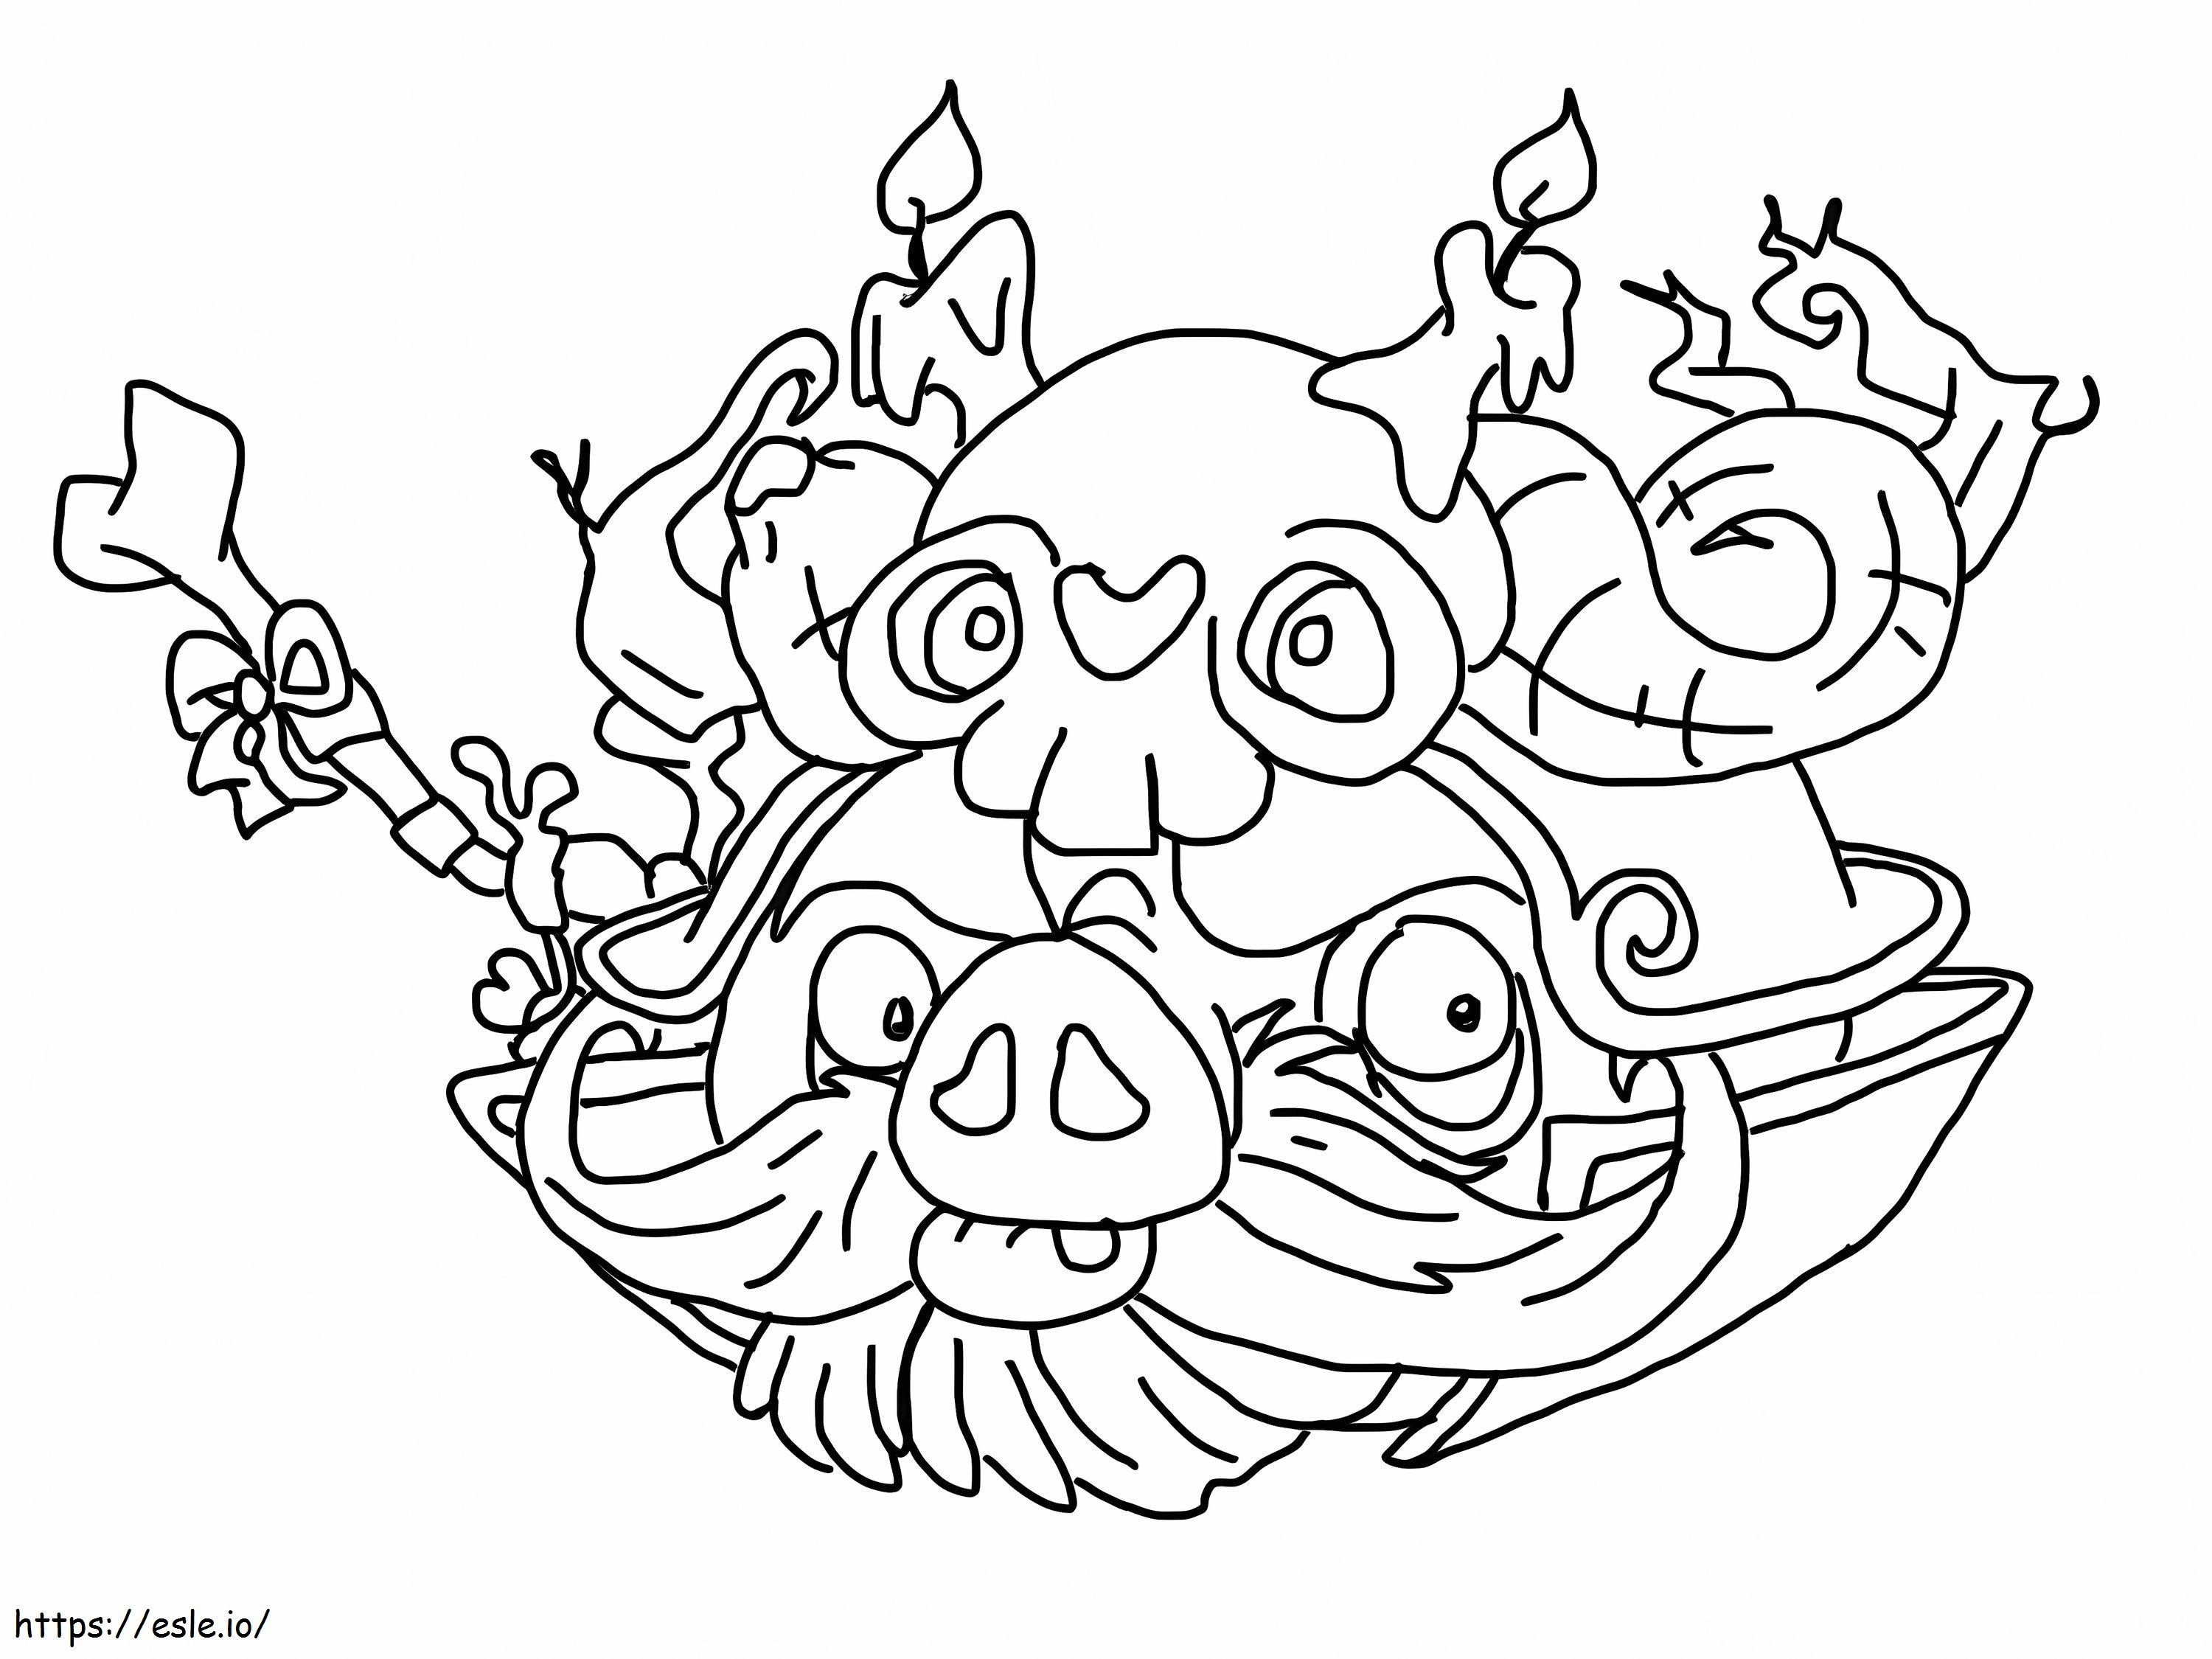 Pig Team coloring page